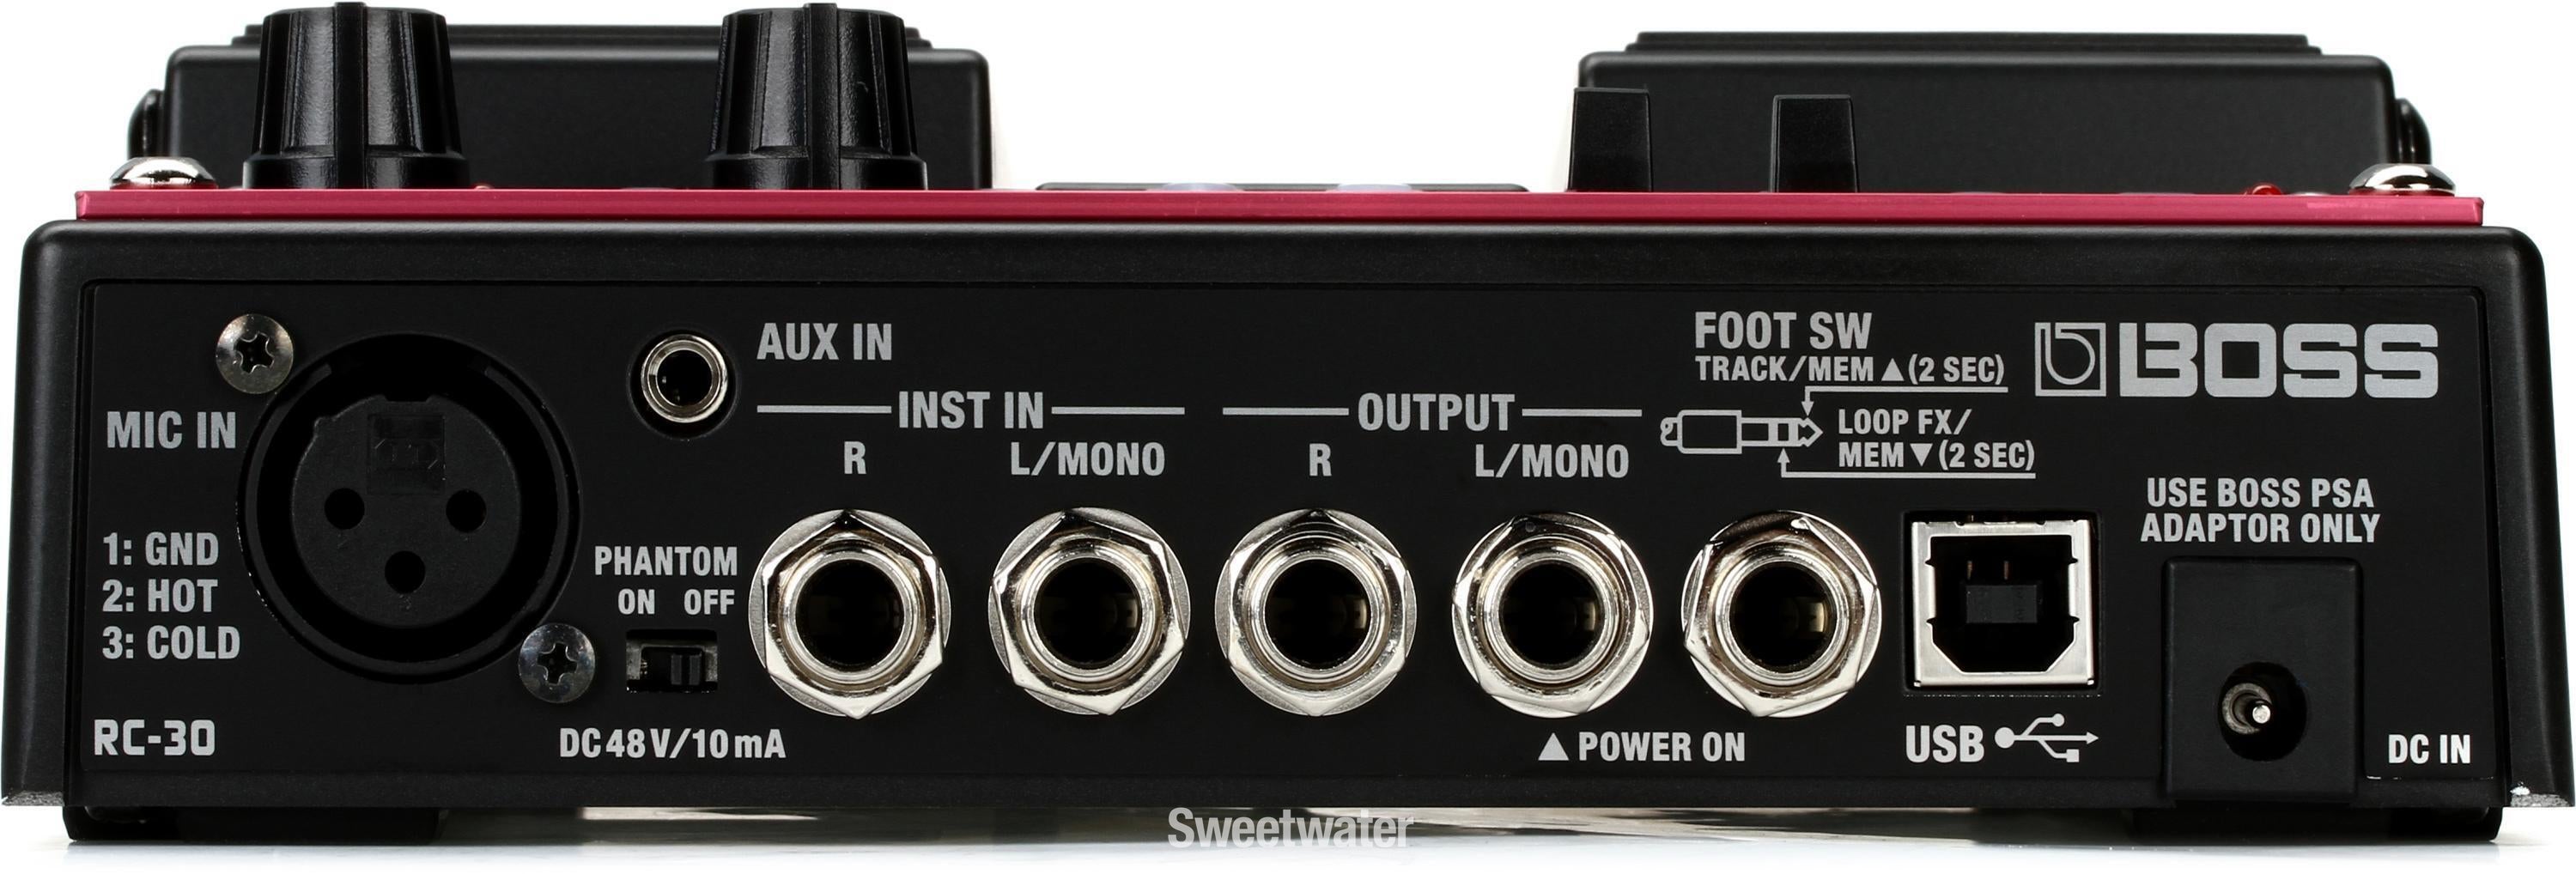 Boss RC-30 Phrase Looper Pedal | Sweetwater